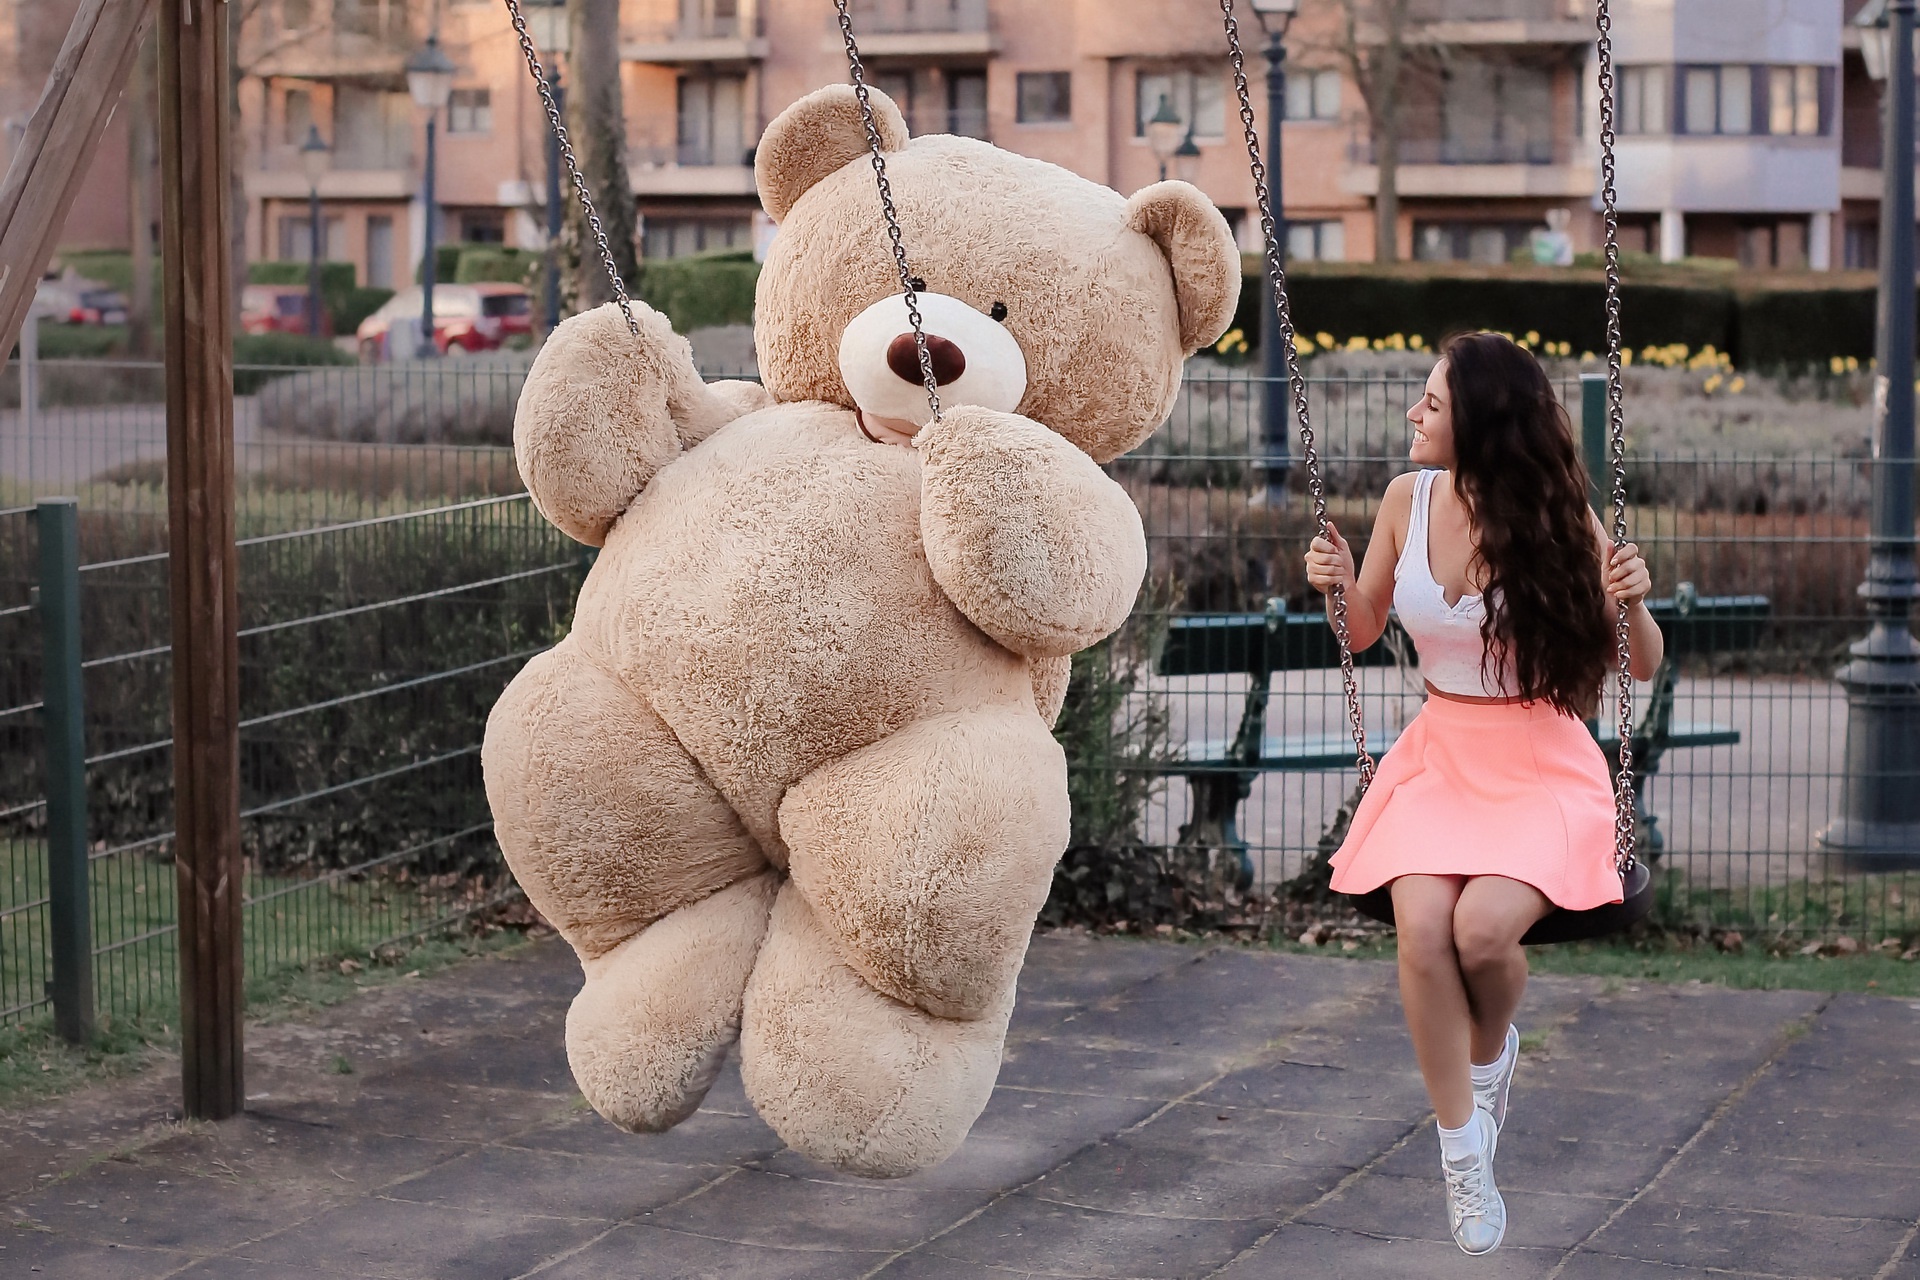 Girl With Big Teddy Bear On Swing Wallpaper Hd Girls Wallpapers 4k Wallpapers Images Backgrounds